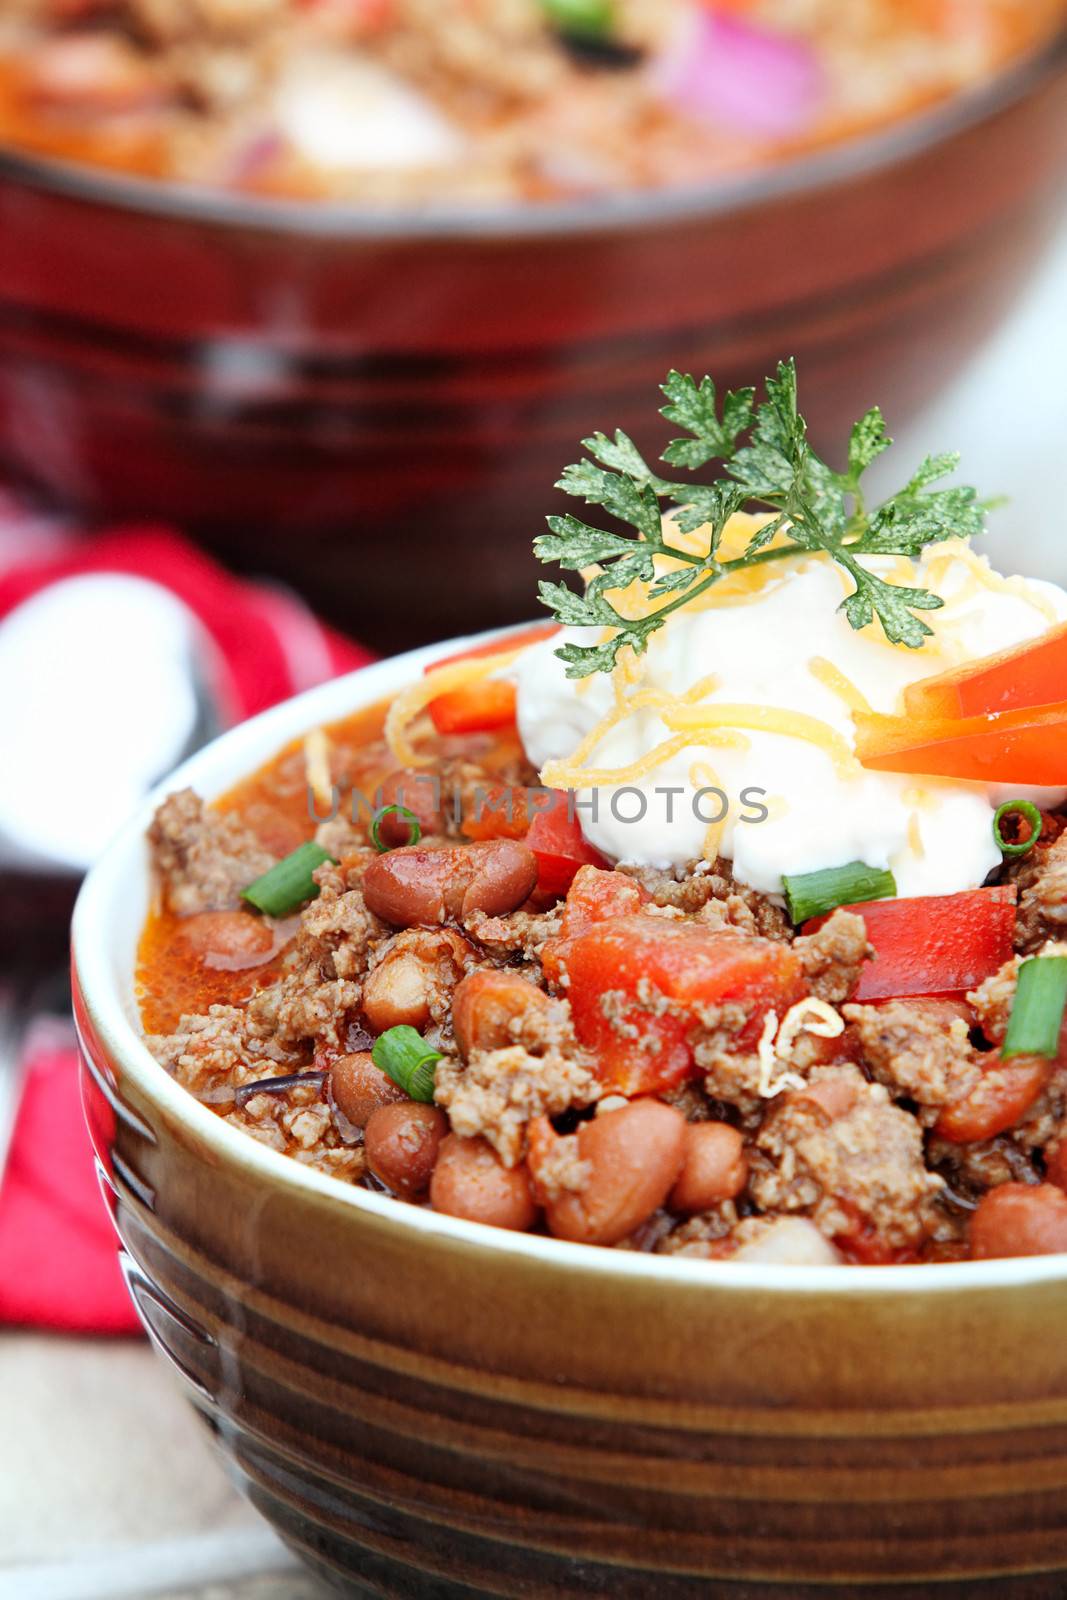 Chili Con Carne with Sour Cream by StephanieFrey